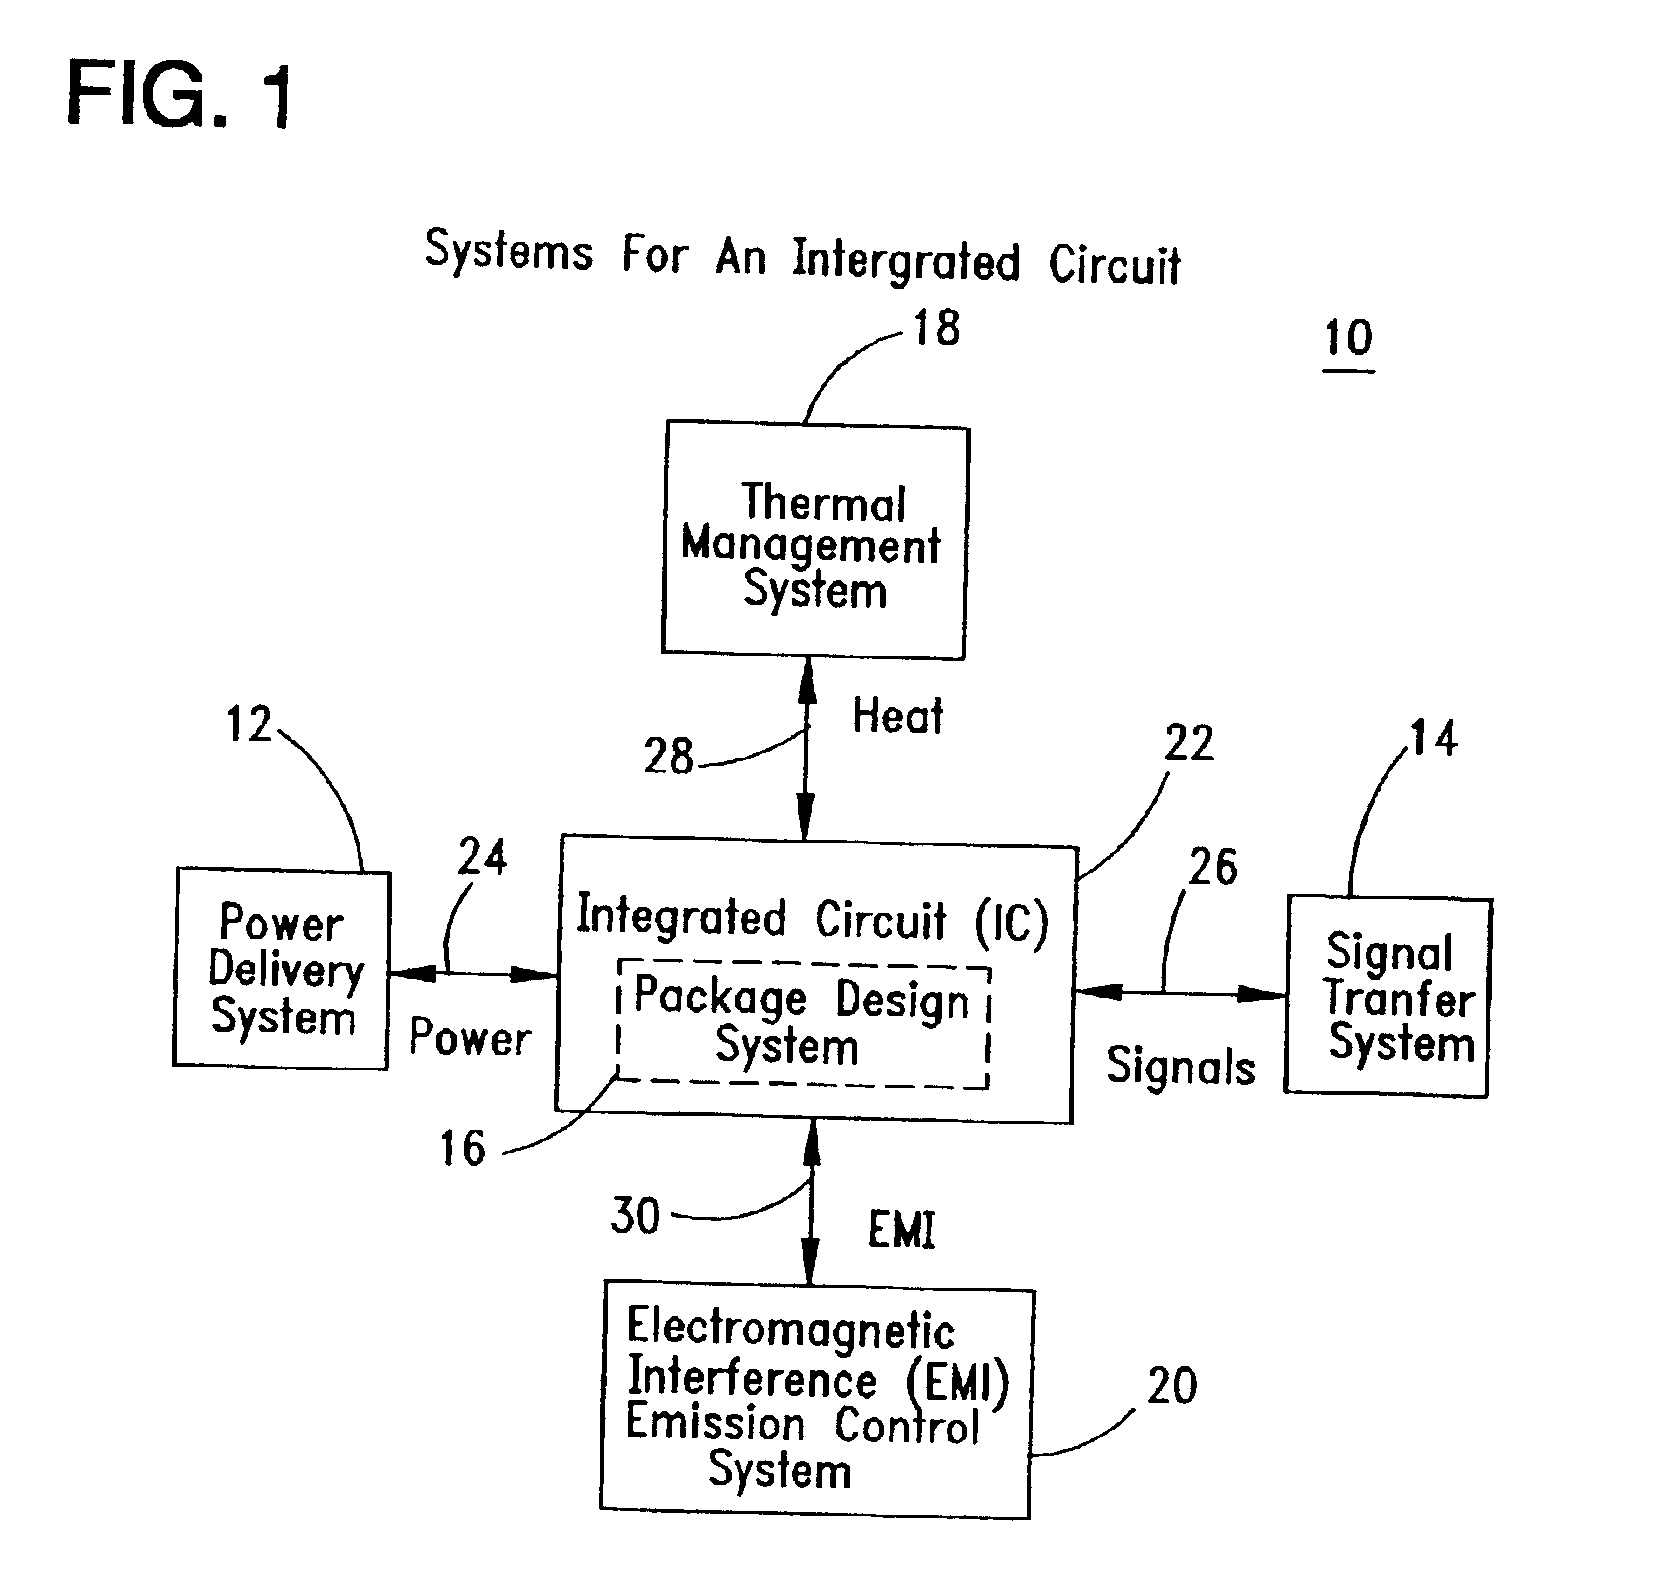 Power delivery and other systems for integrated circuits